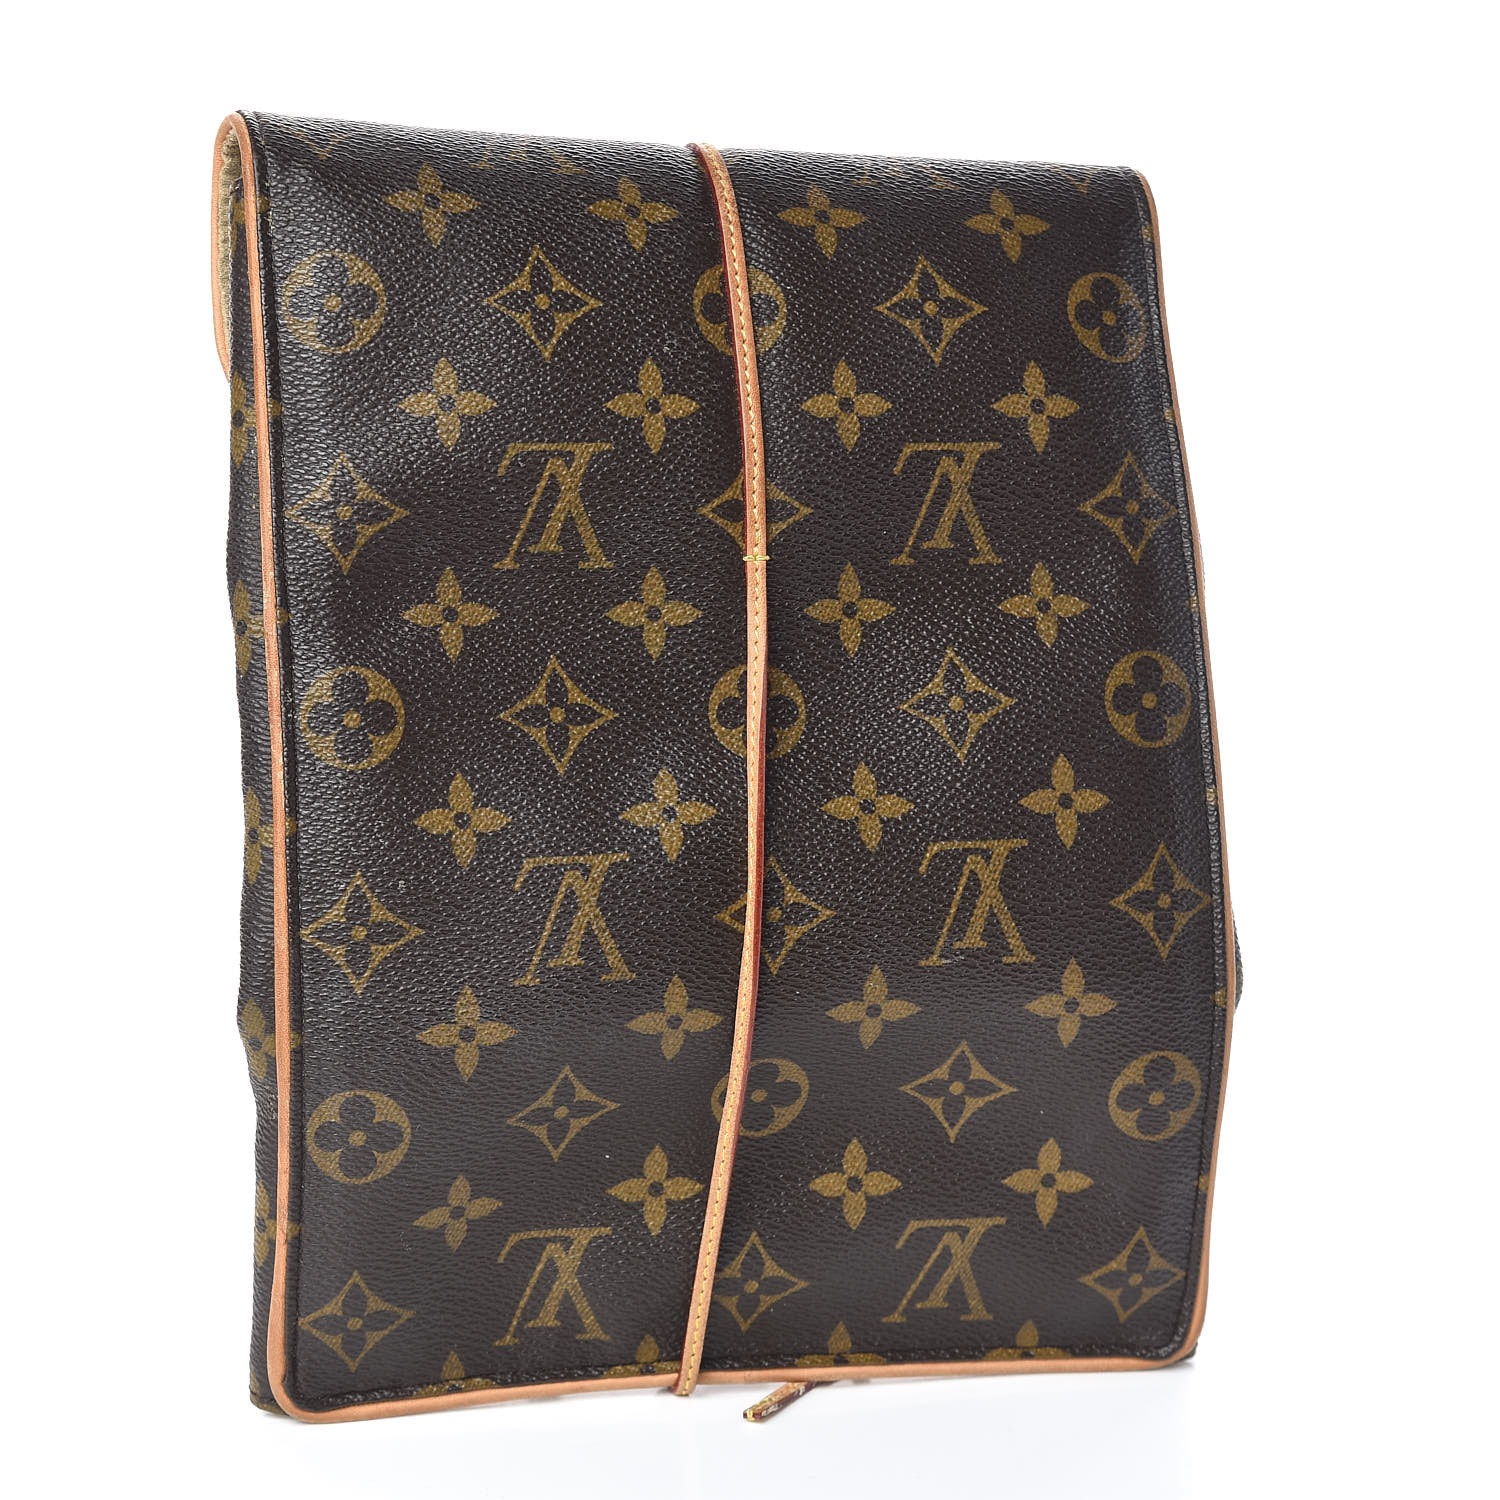 LOUIS VUITTON Monogram Jewelry Roll Pouch 495217